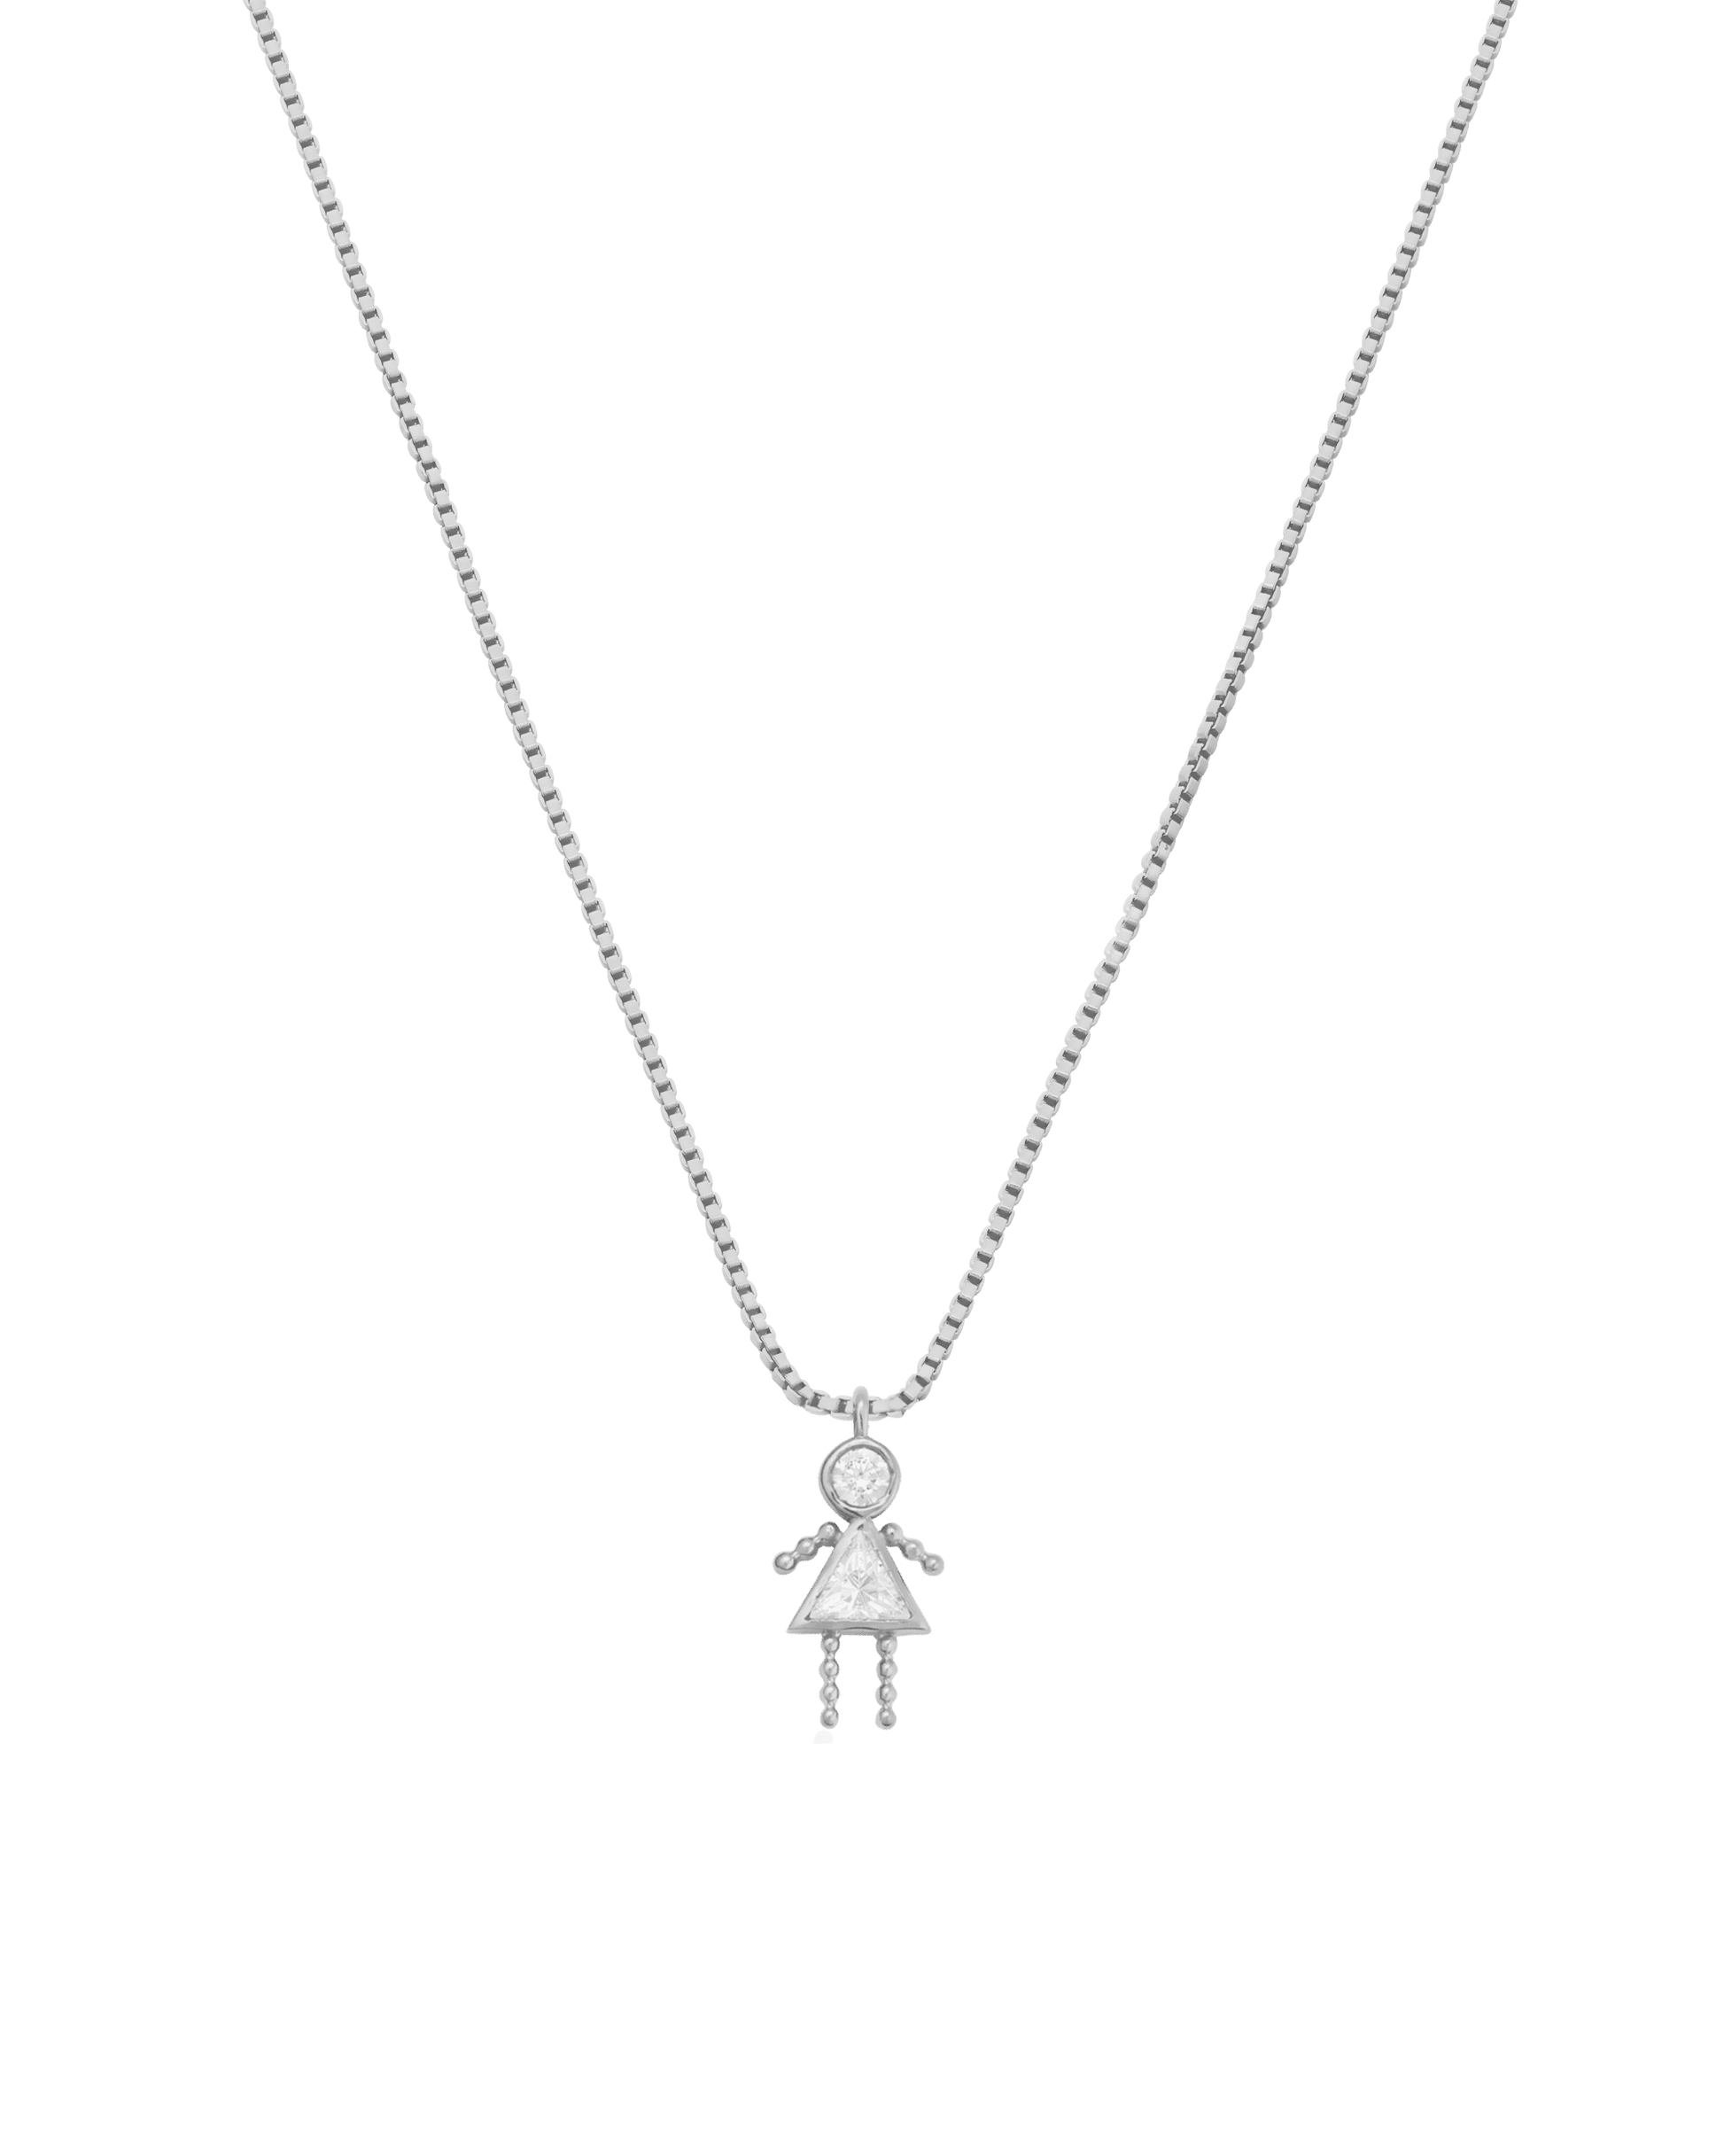 Single Mini Me Necklace - 925 Sterling Silver Necklaces magal-dev 